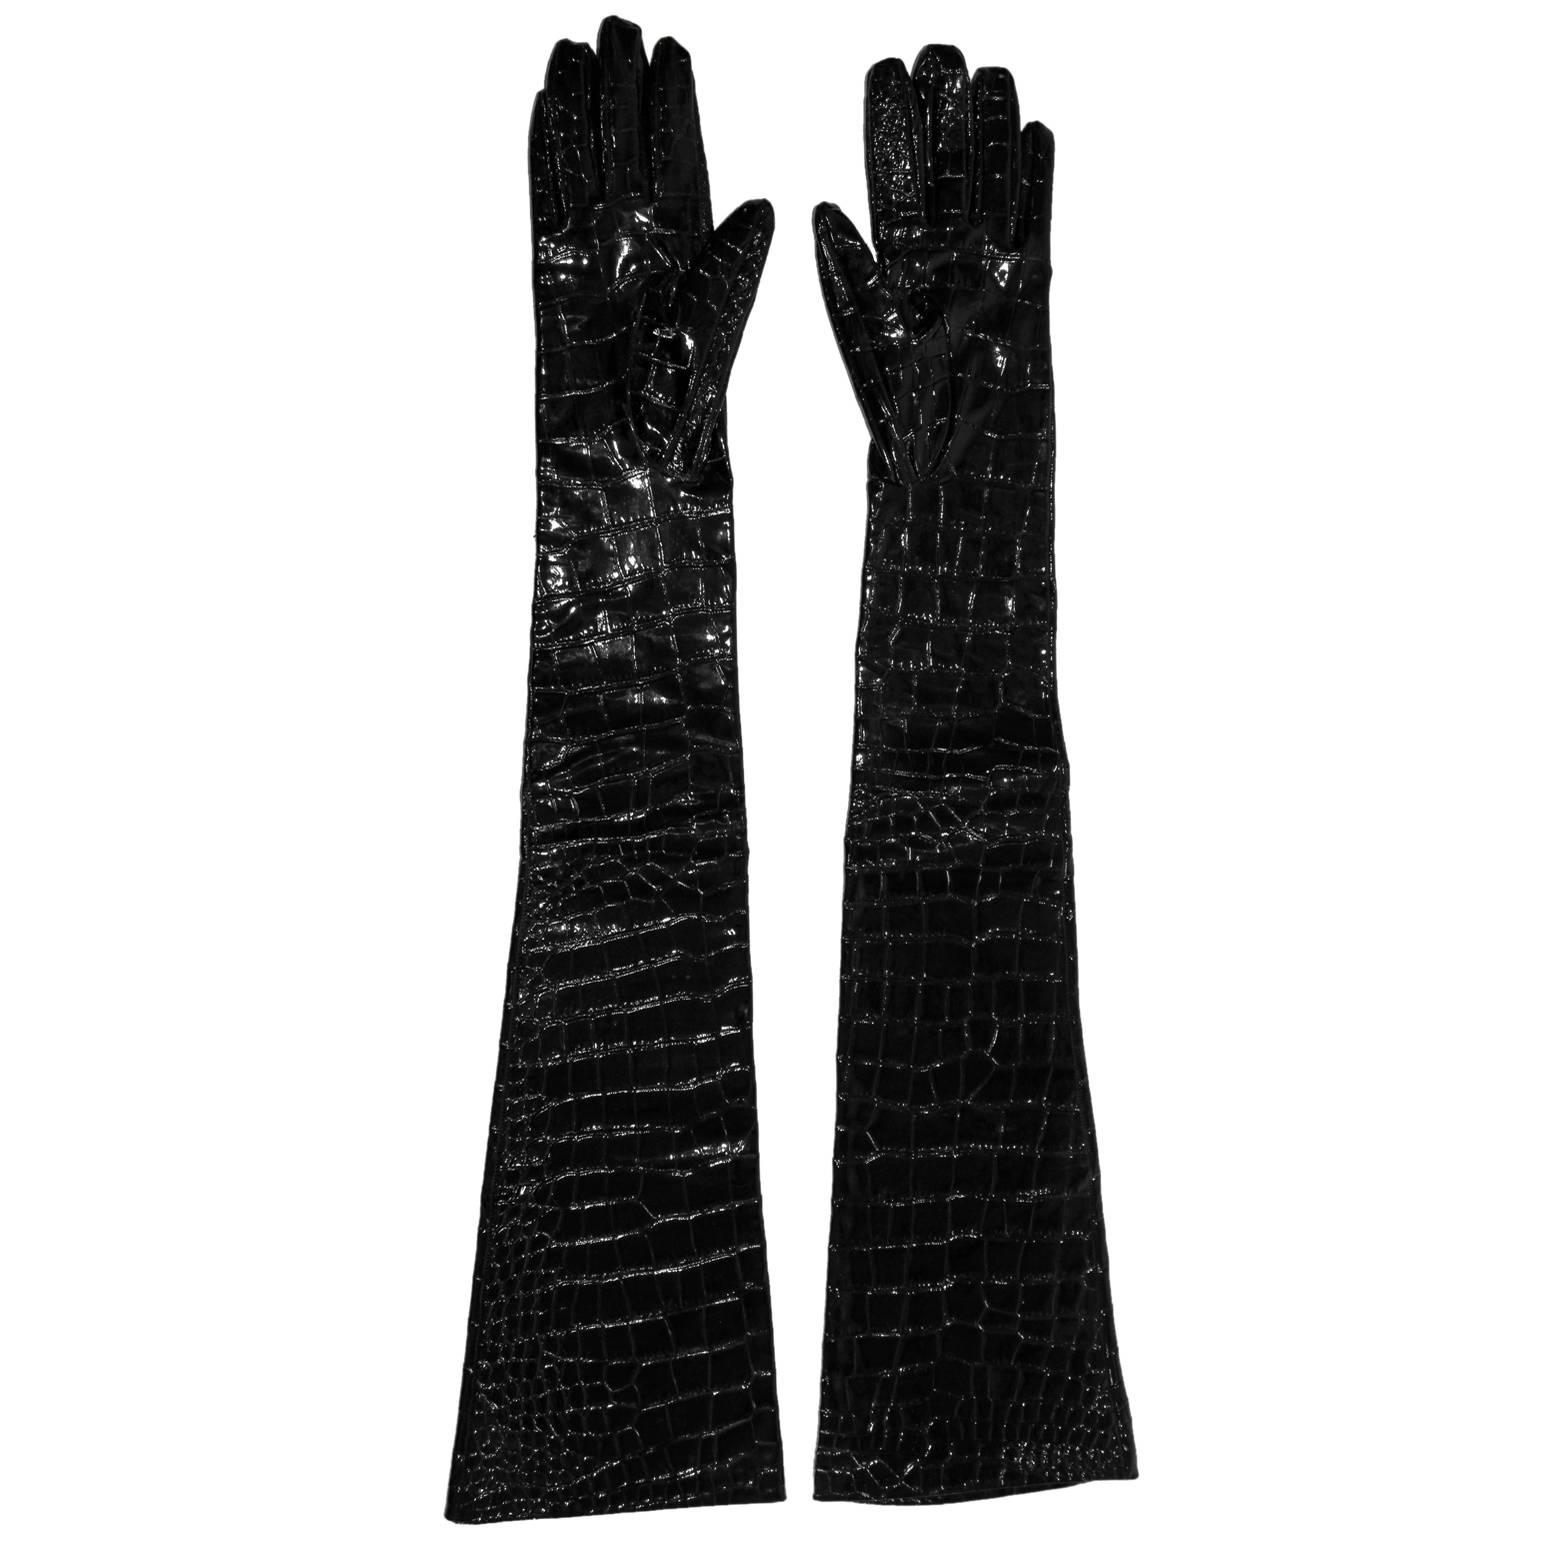 The Most Amazing Yves Saint Laurent YSL Patent Crocodile Leather Elbow Gloves! M